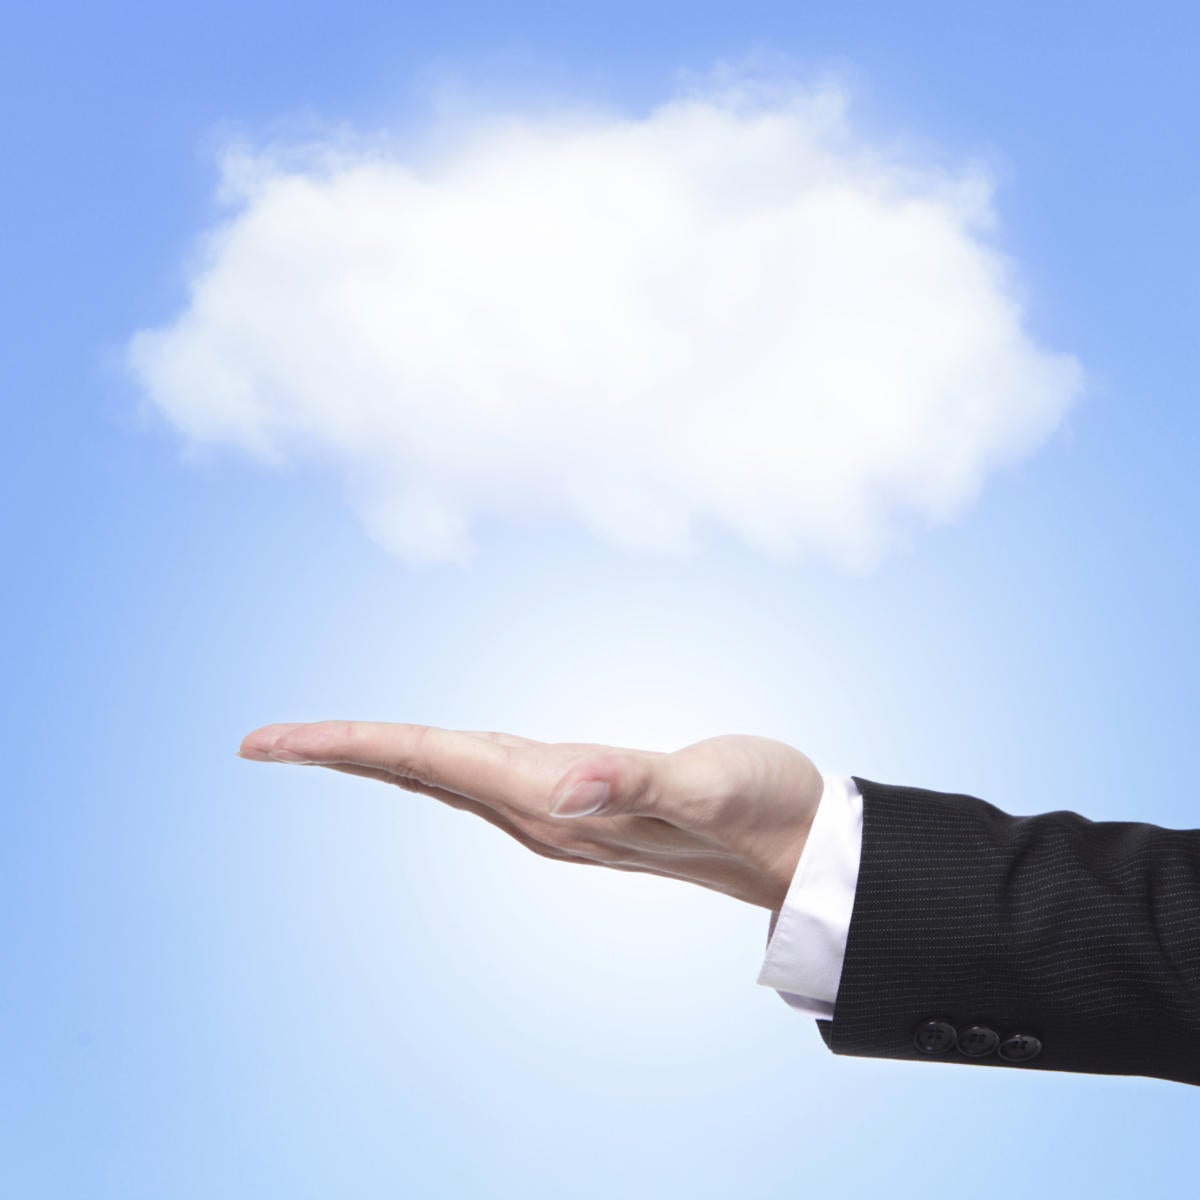 Why the cloud? In 2016, it was the lure of the new